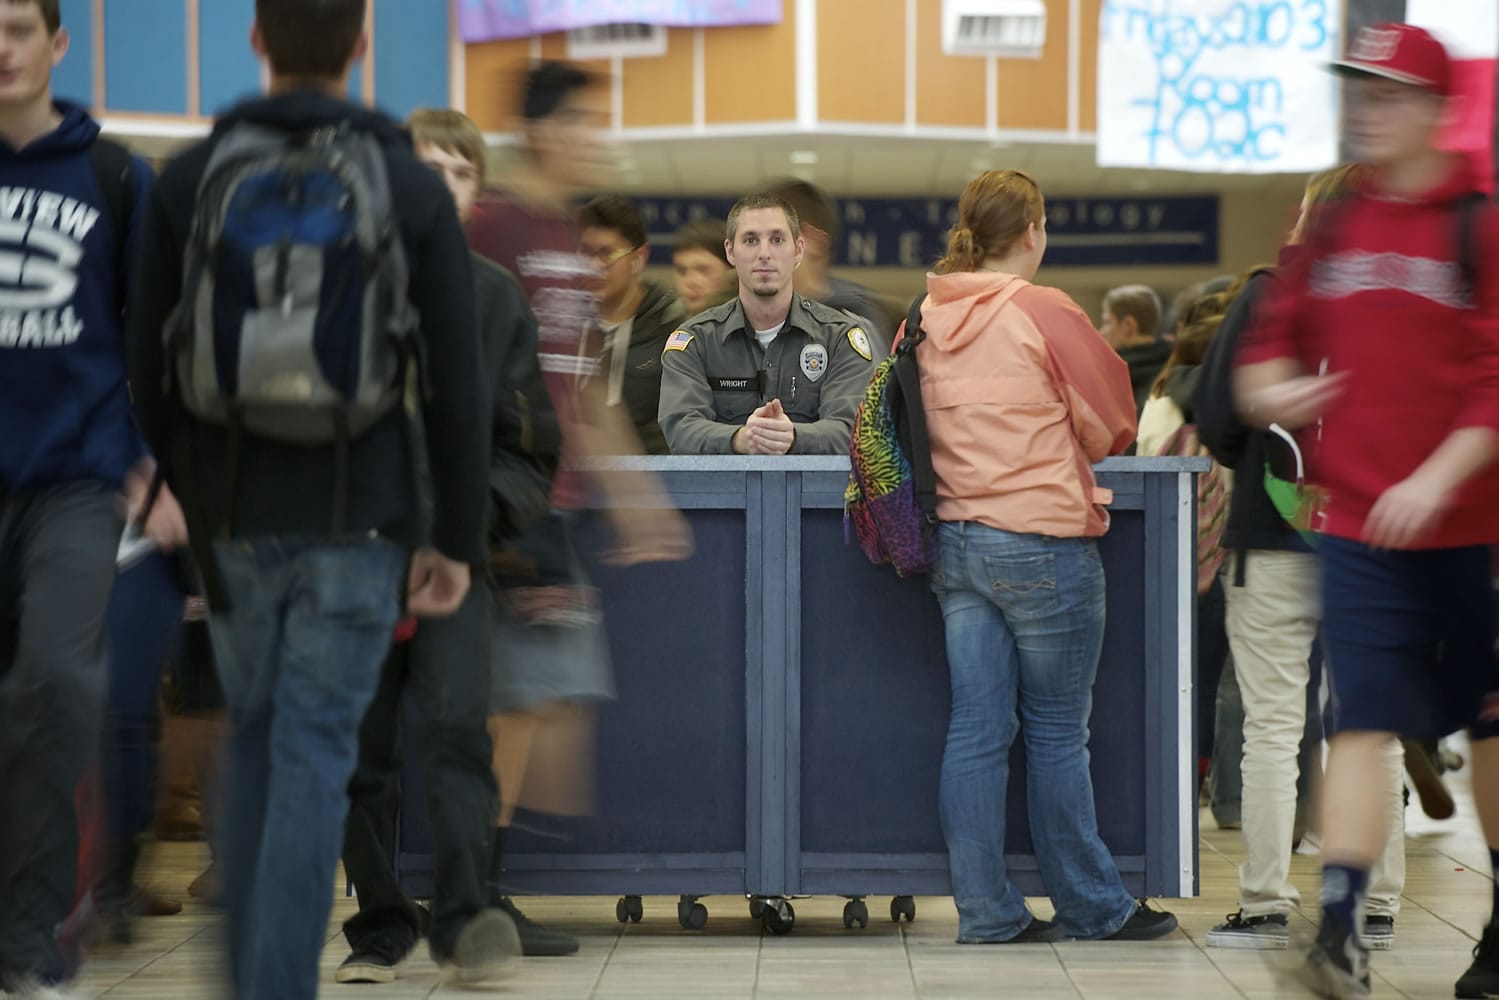 Vancouver School District Resource Officer Alex Wright keeps watch on students from a security kiosk just inside the main doors at Skyview High School.